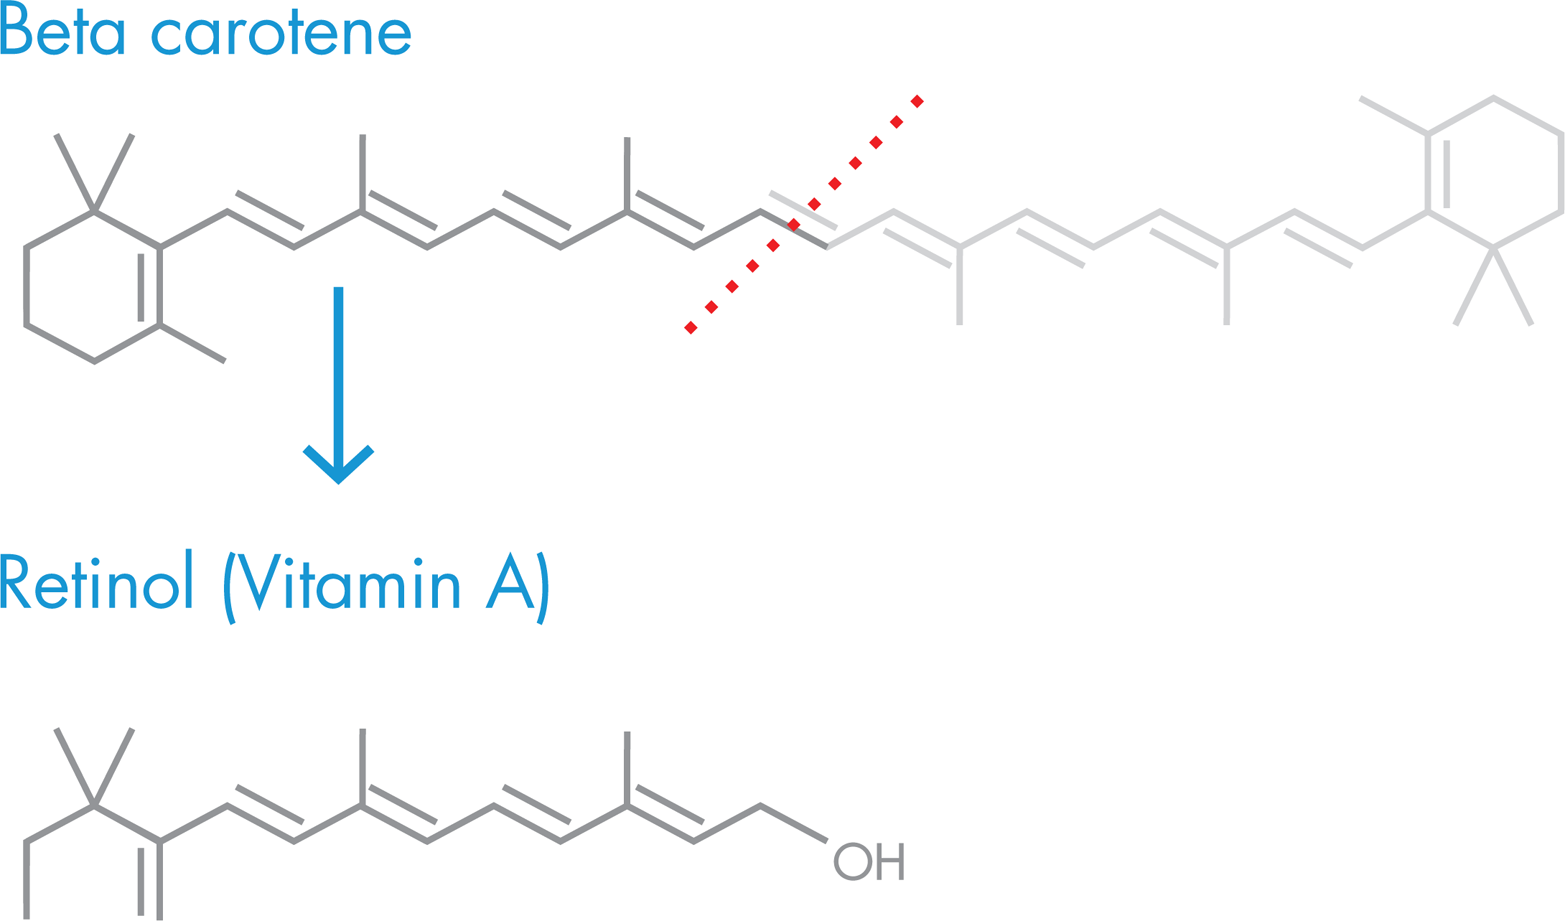 Vitamin A synthesis. Humans acquire vitamin A, also known as retinol, by eating a diet rich in β-carotene, which is cleaved into two molecules of vitamin A during digestion.